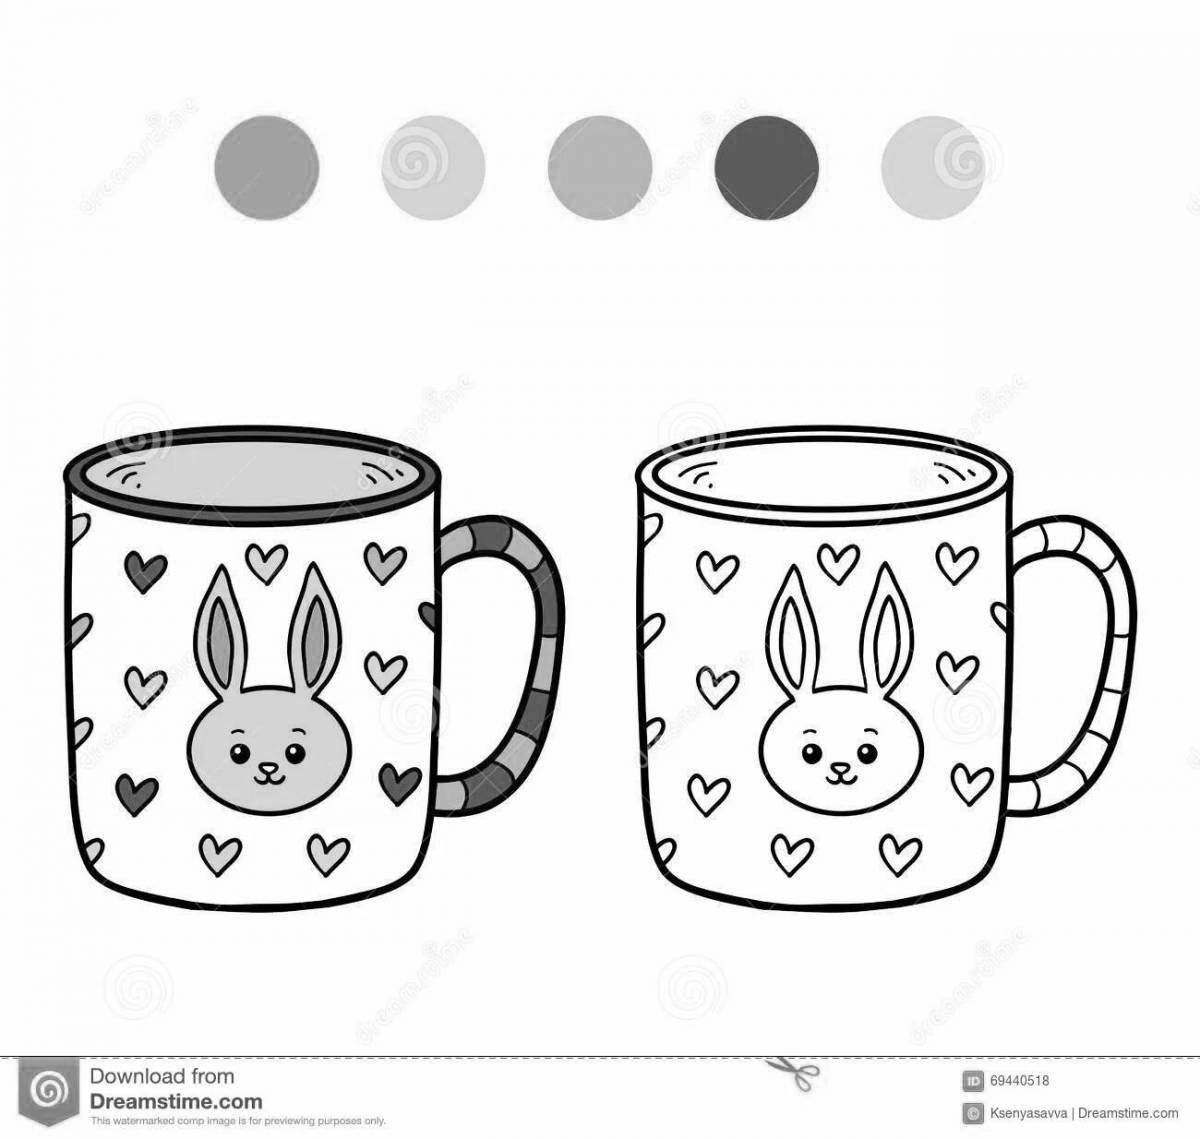 Coloring mug with color filling for children 4-5 years old